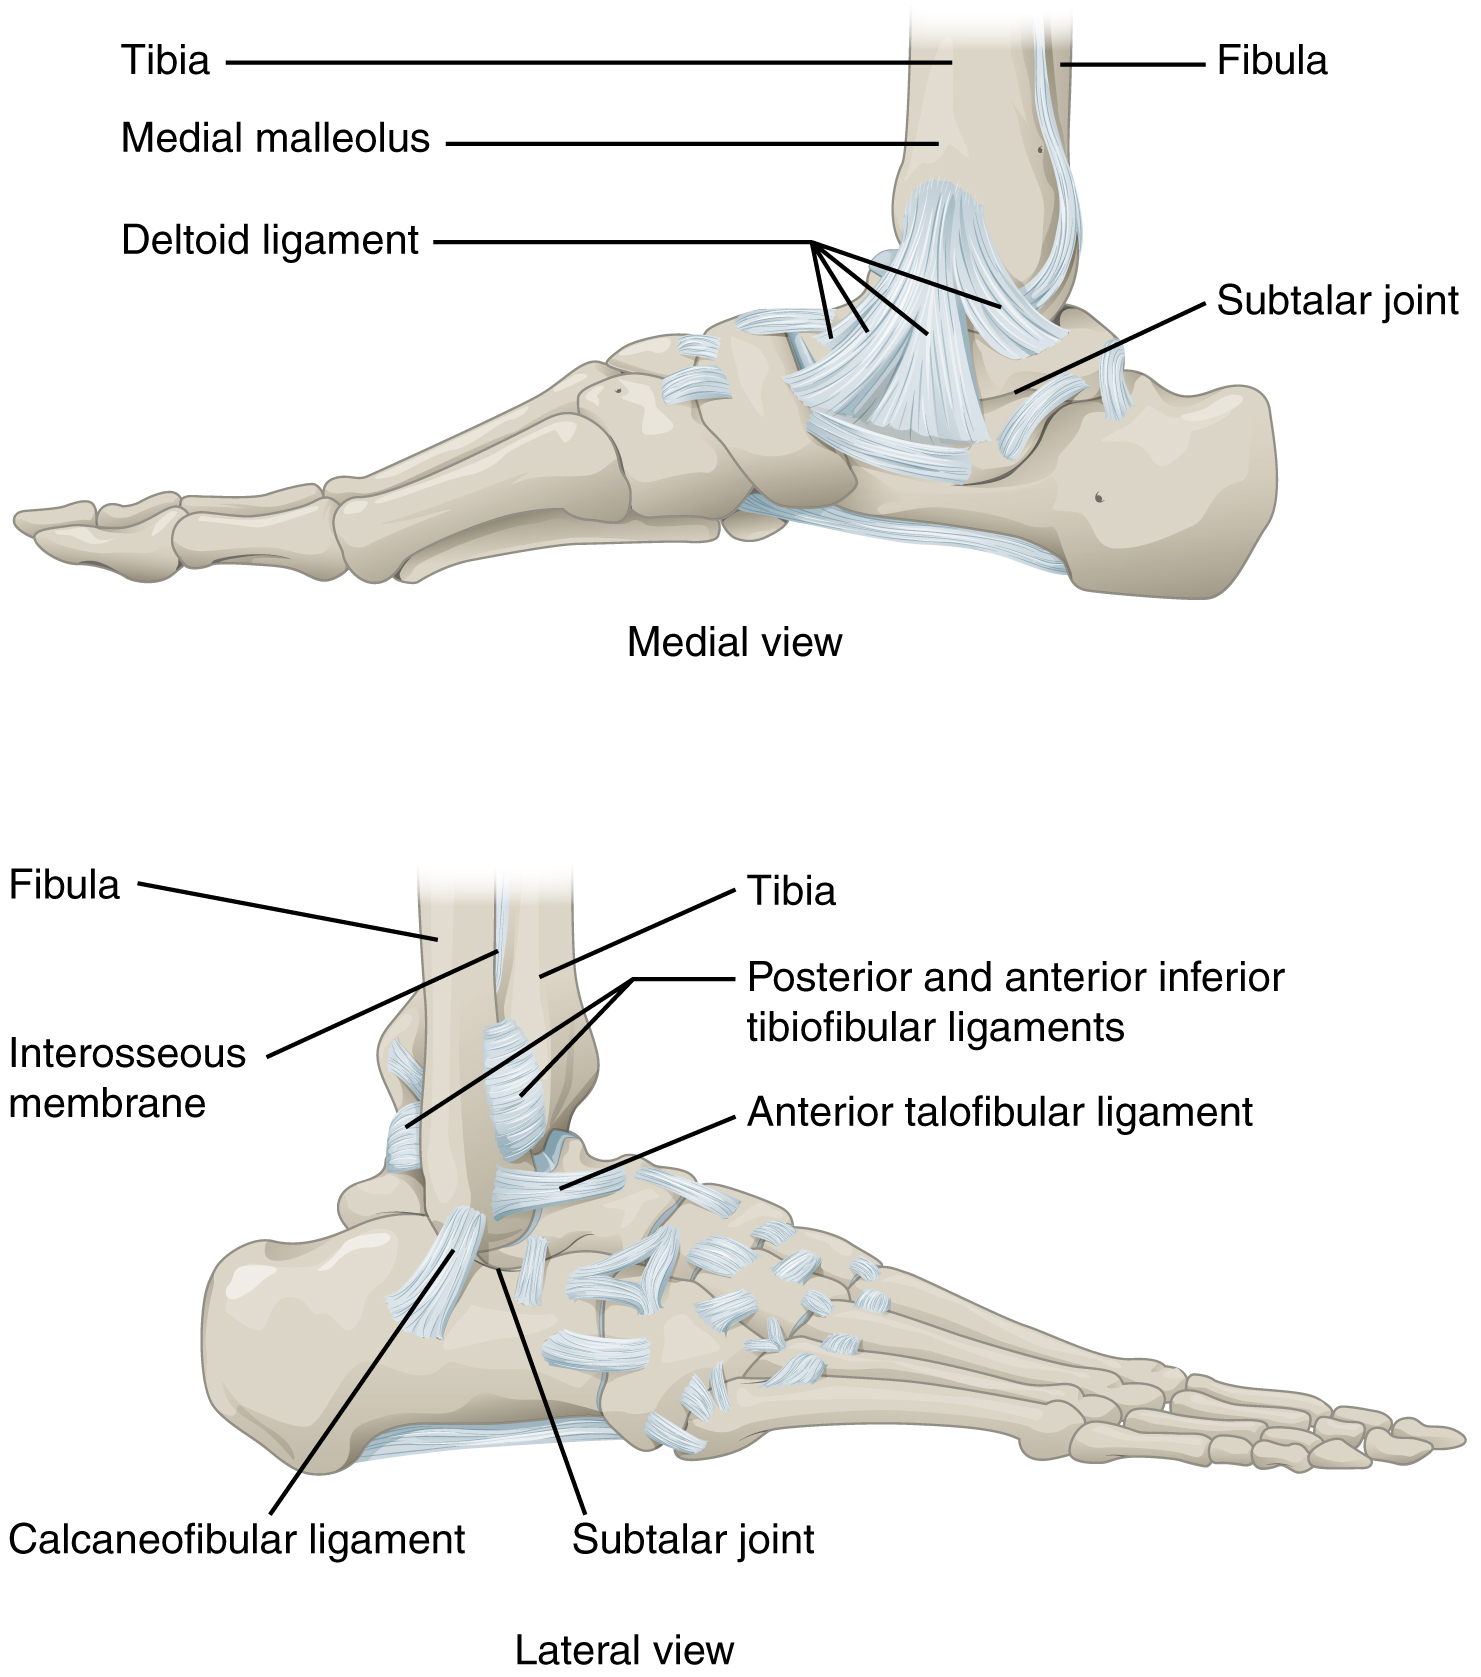 This figure shows the structure of the ankle and feet joints. The top panel shows the medial view of the ankle joint, and the bottom panel shows the lateral view.